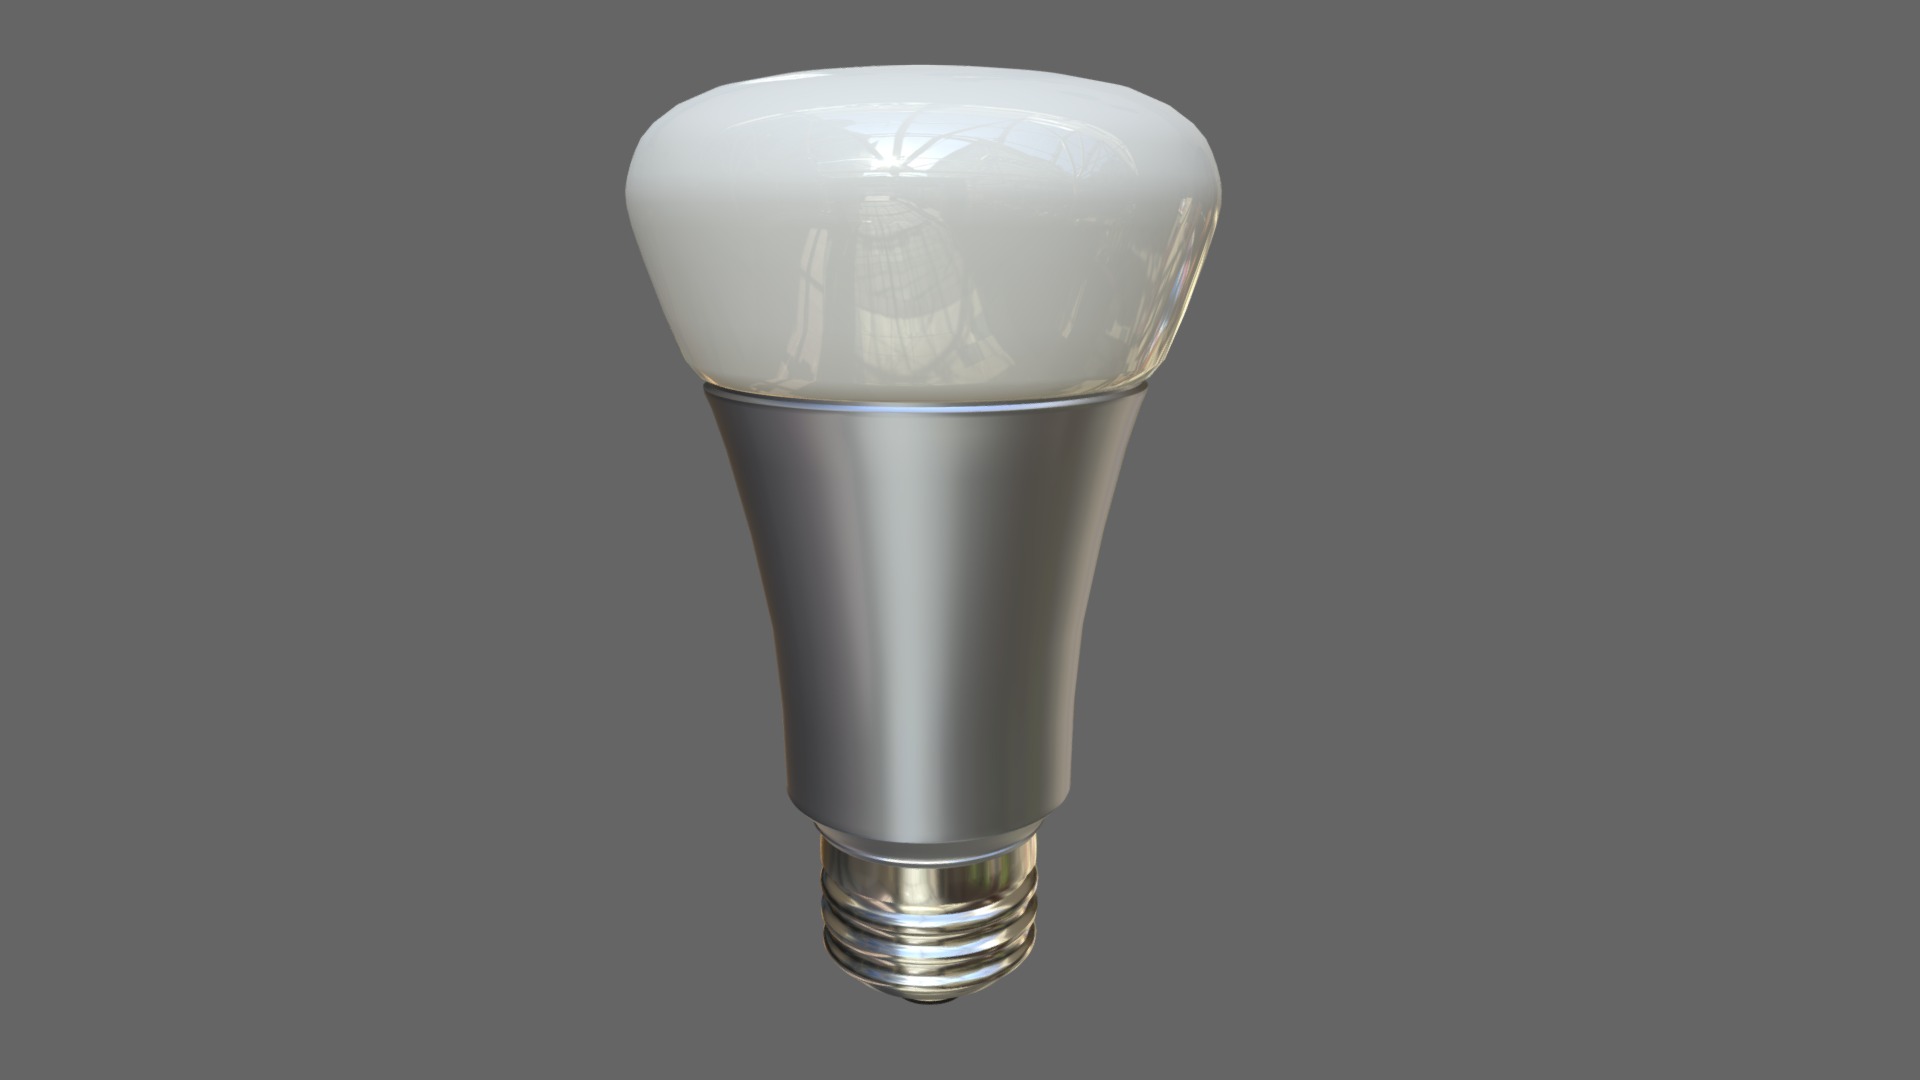 3D model Philips Hue Lightbulb LED - This is a 3D model of the Philips Hue Lightbulb LED. The 3D model is about a glass of milk.